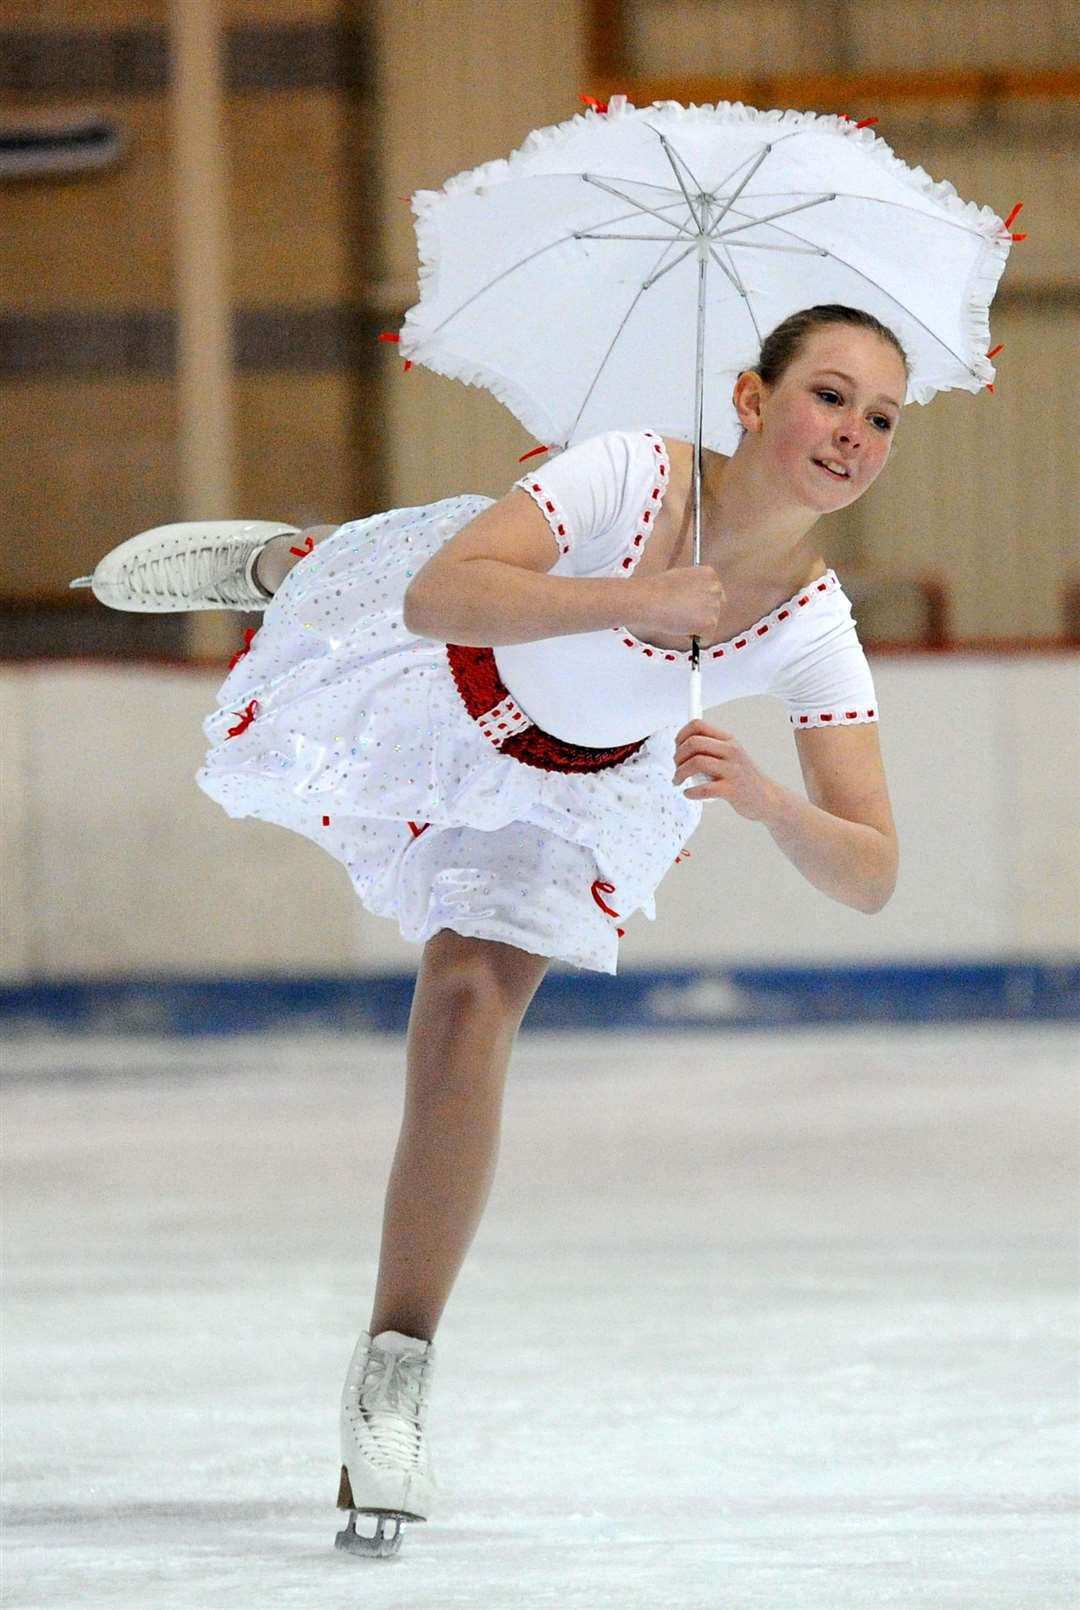 Emma Marandola shows off her skills on ice at a club show before the pandemic. Picture: Eric Cormack.